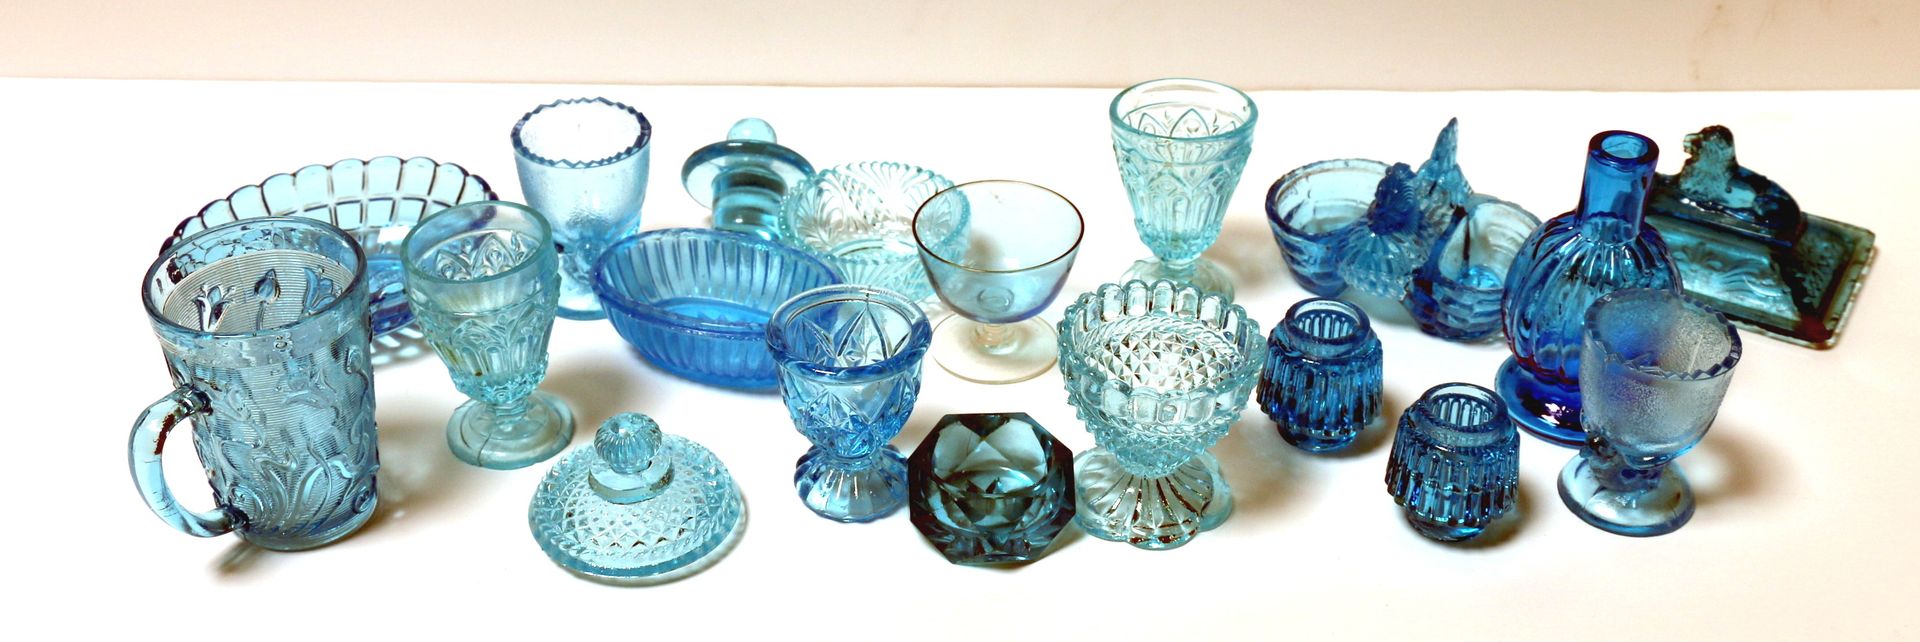 Null Portieux : batch of about twenty pieces of blue pressed glass shapes